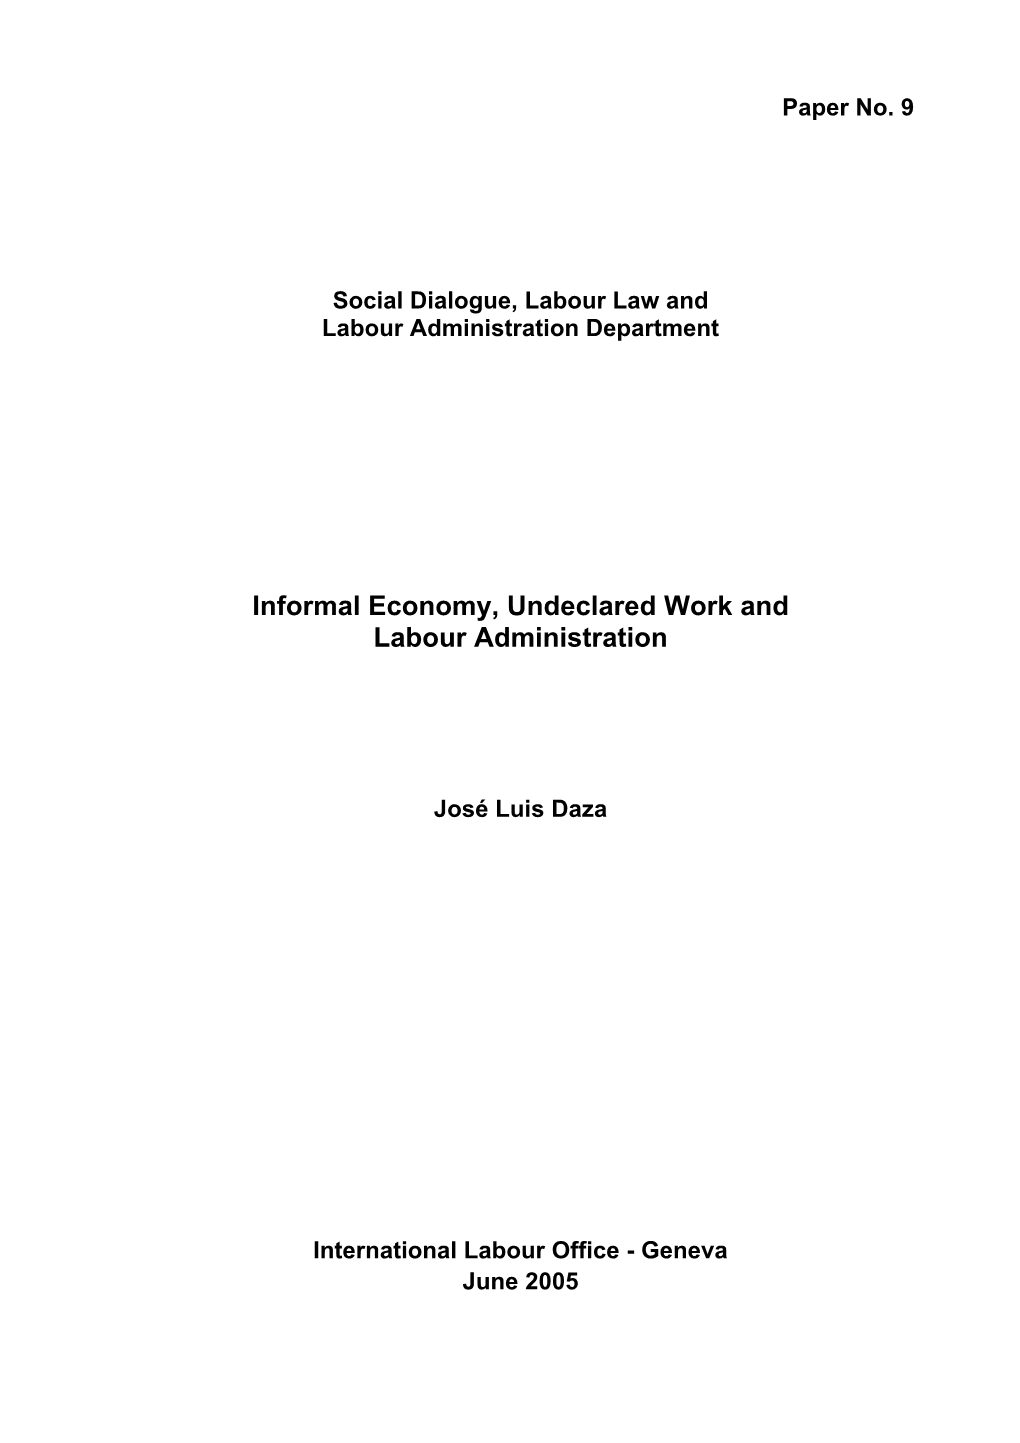 Informal Economy, Undeclared Work and Labour Administration